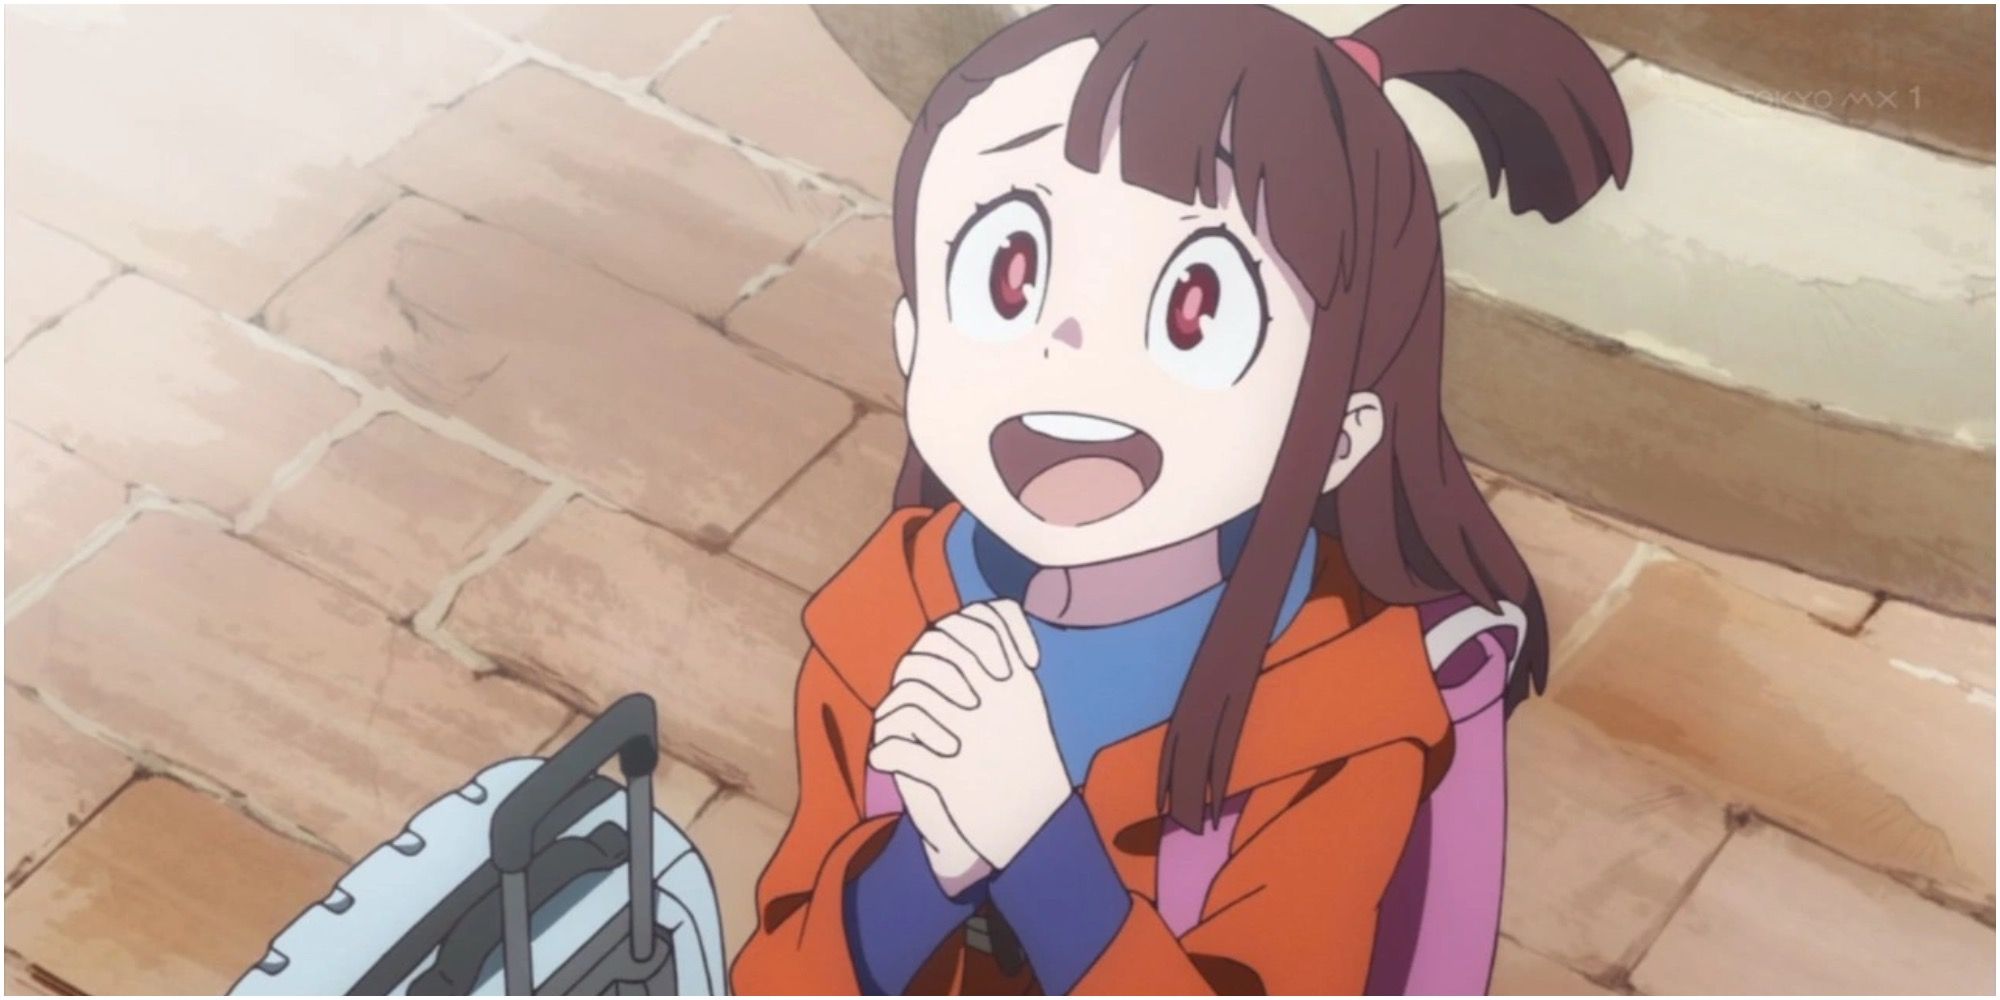 Akko from Little Witch Academia with Starry Eyes